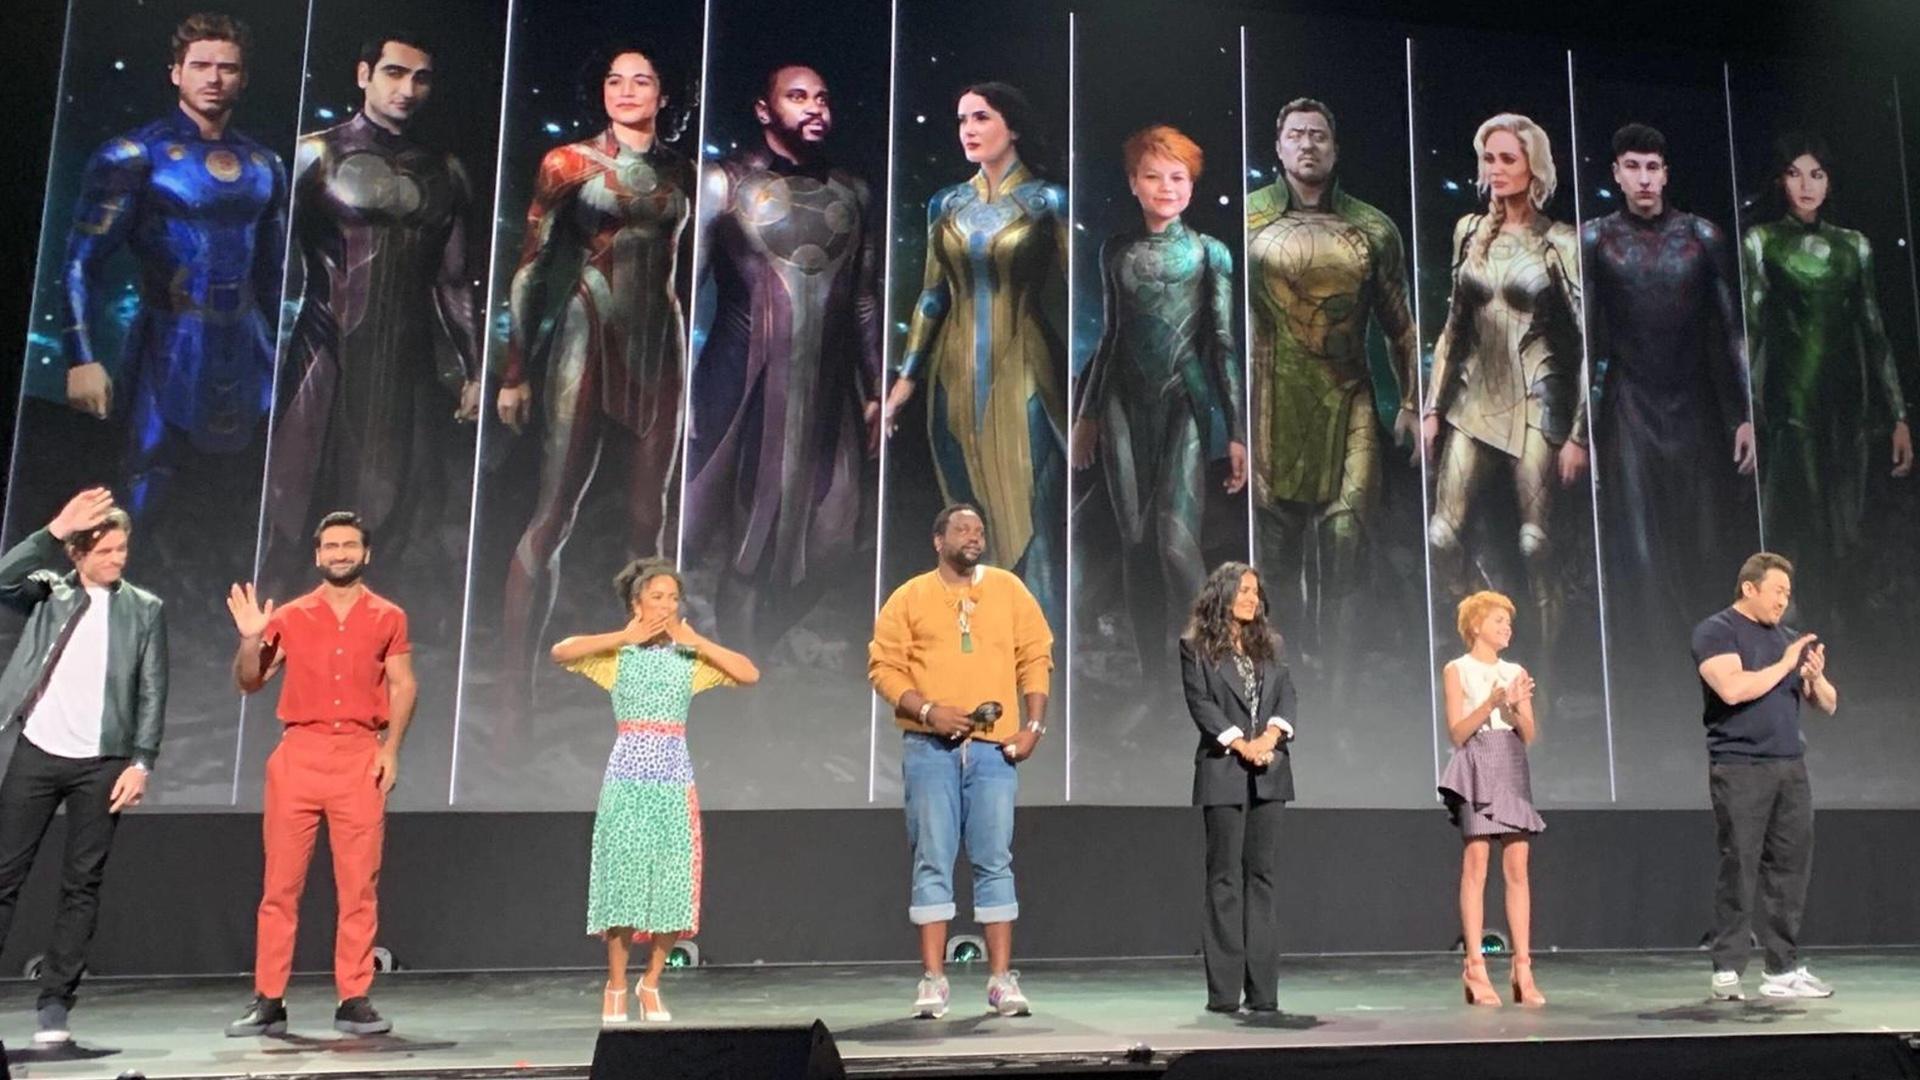 New Set Photo From Marvel's THE ETERNALS Show the Cast in Their Full Costumes